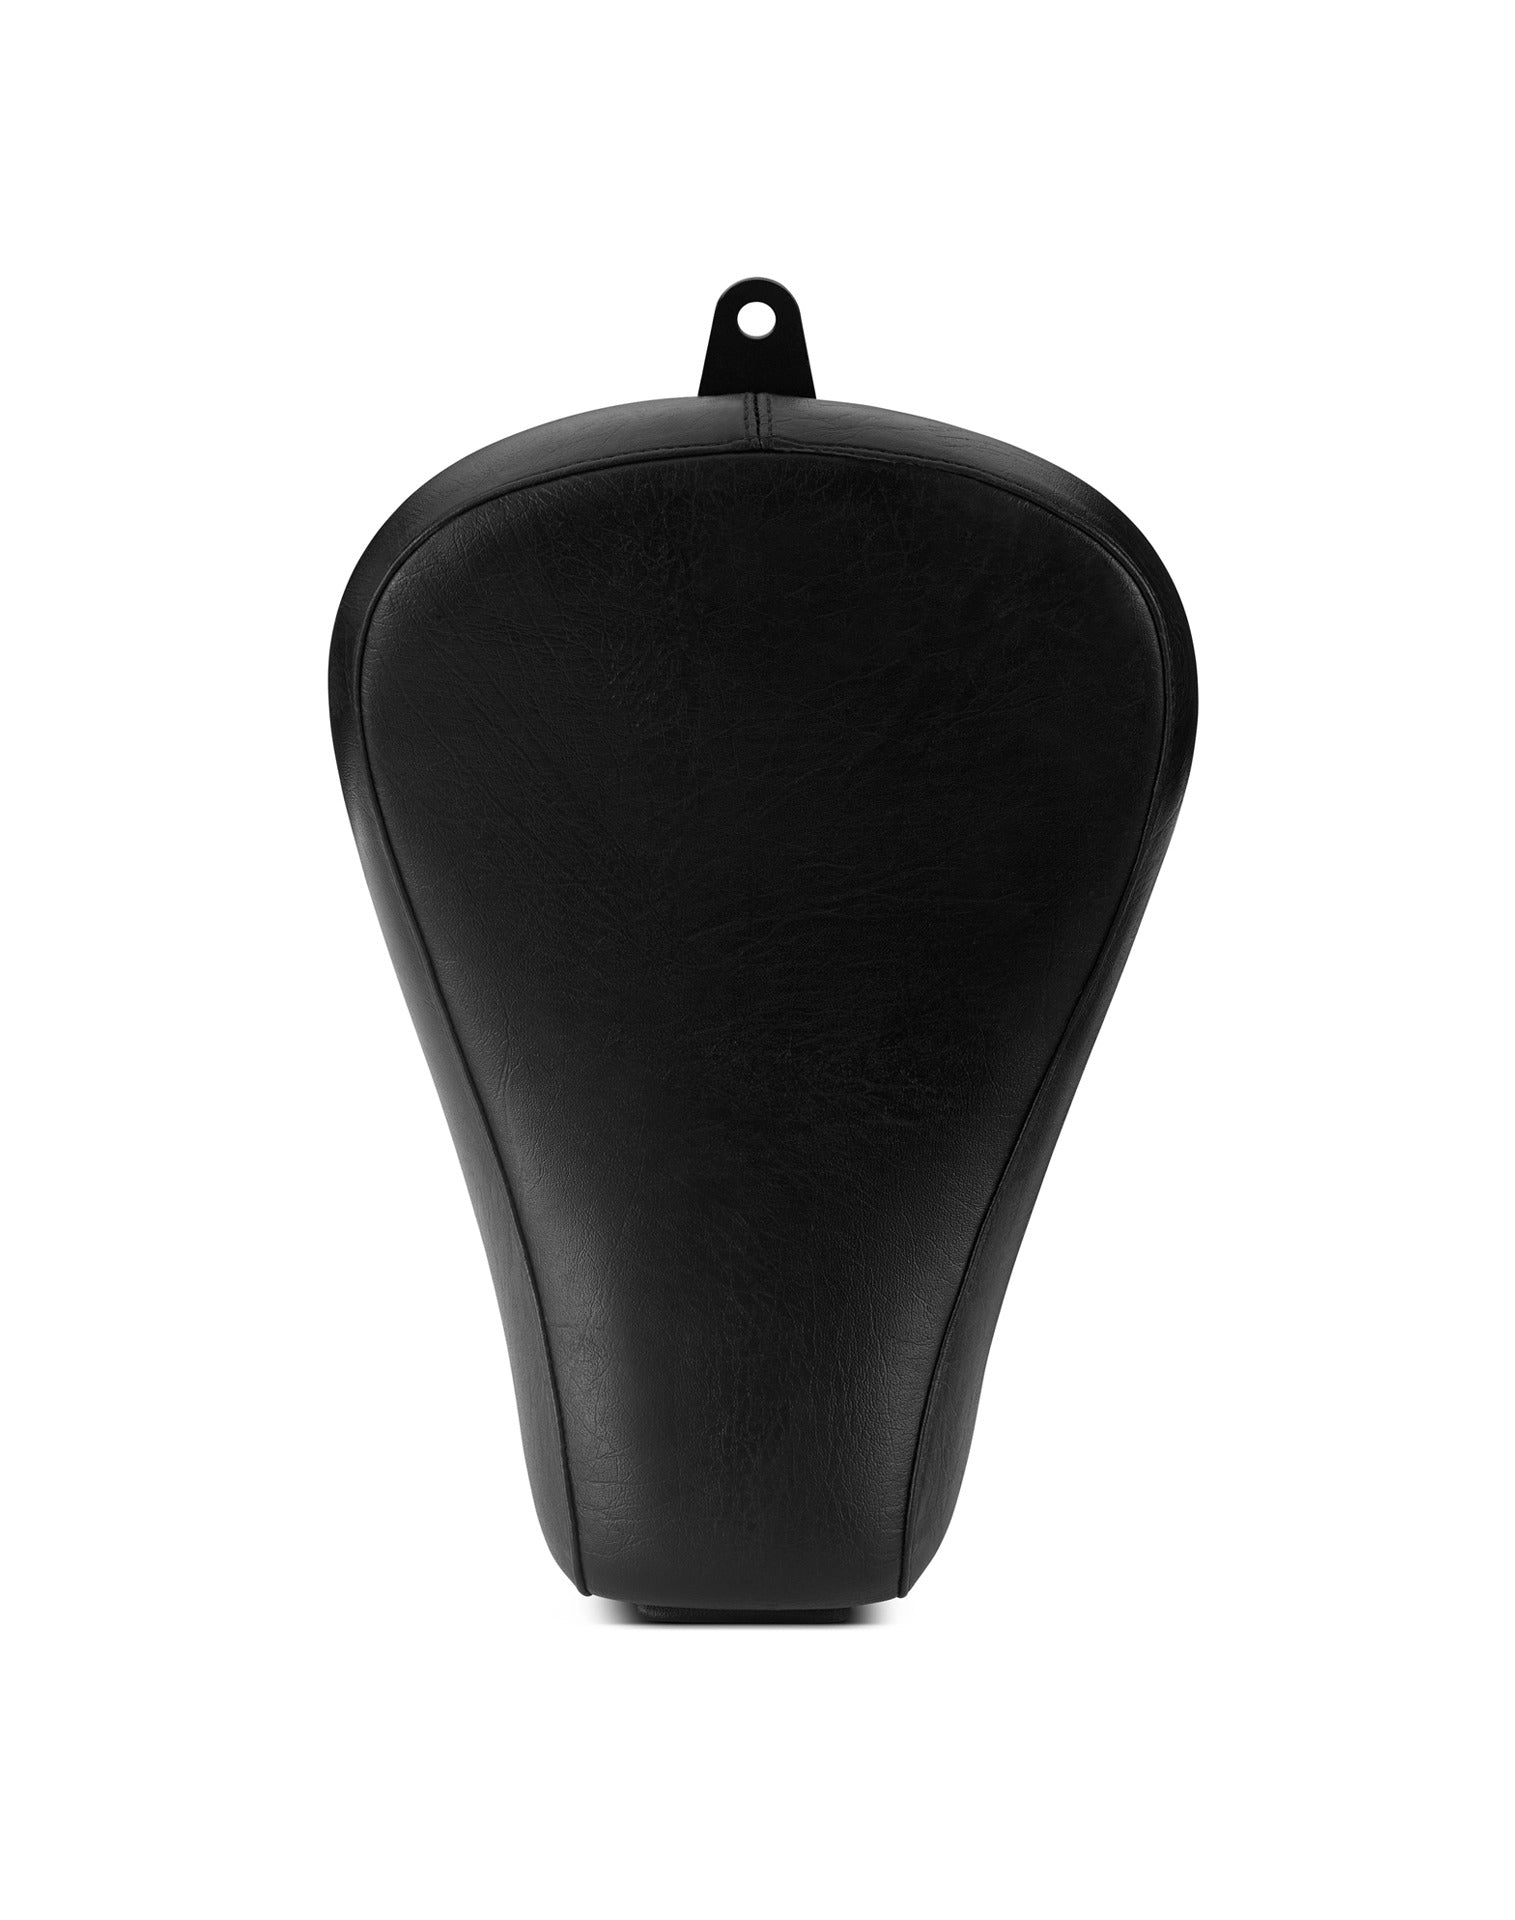 Iron Born Plain Design Motorcycle Solo Seat for Sportster 883 Low XL883L 